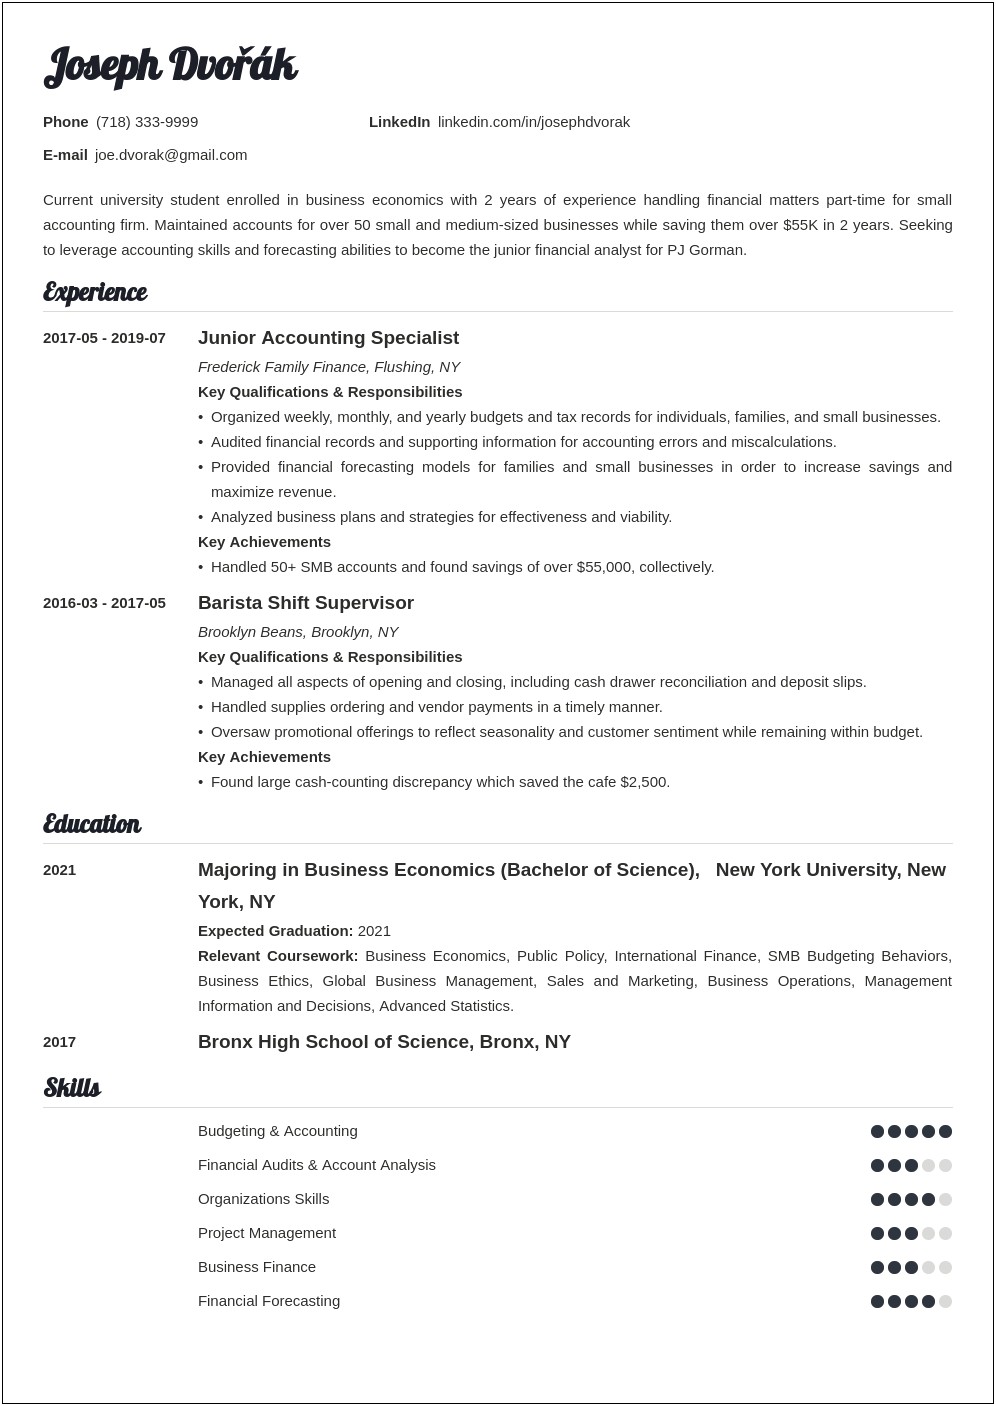 Resume Objectives For Working Students In College